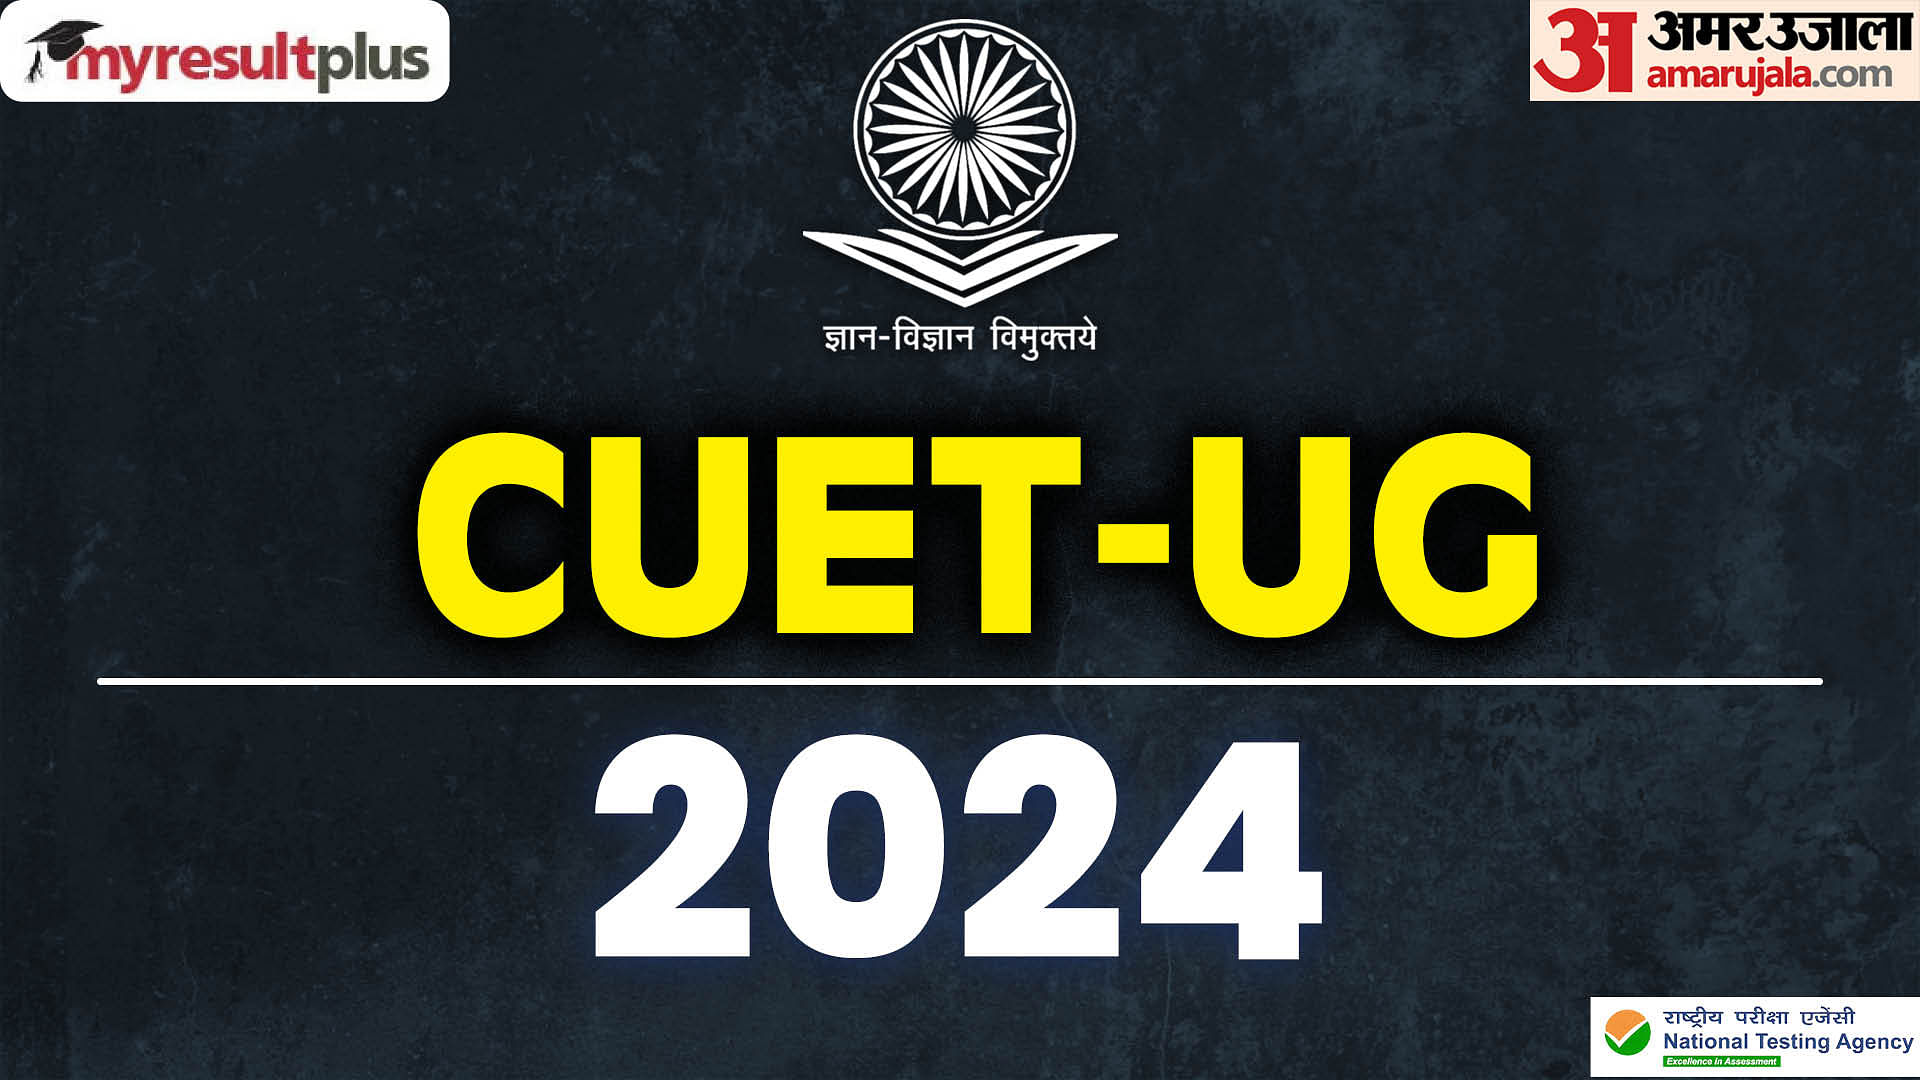 CUET UG 2024 Answer Key releasing soon, Read the steps to download here